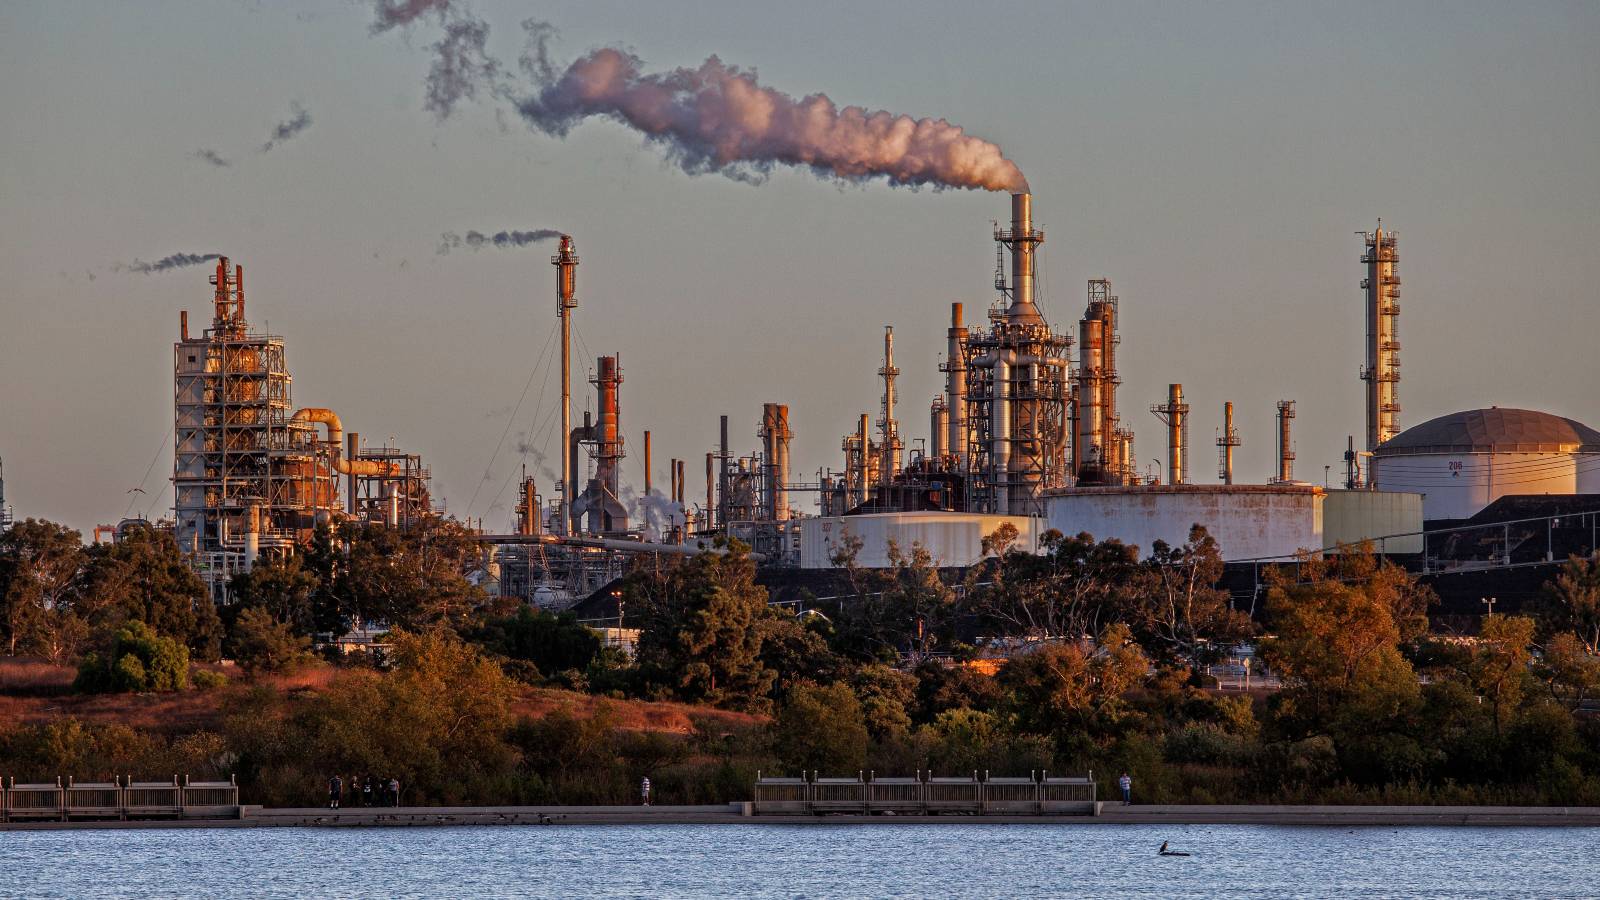 The Phillips 66 oil refinery in Wilmington, California sends pollution into the air